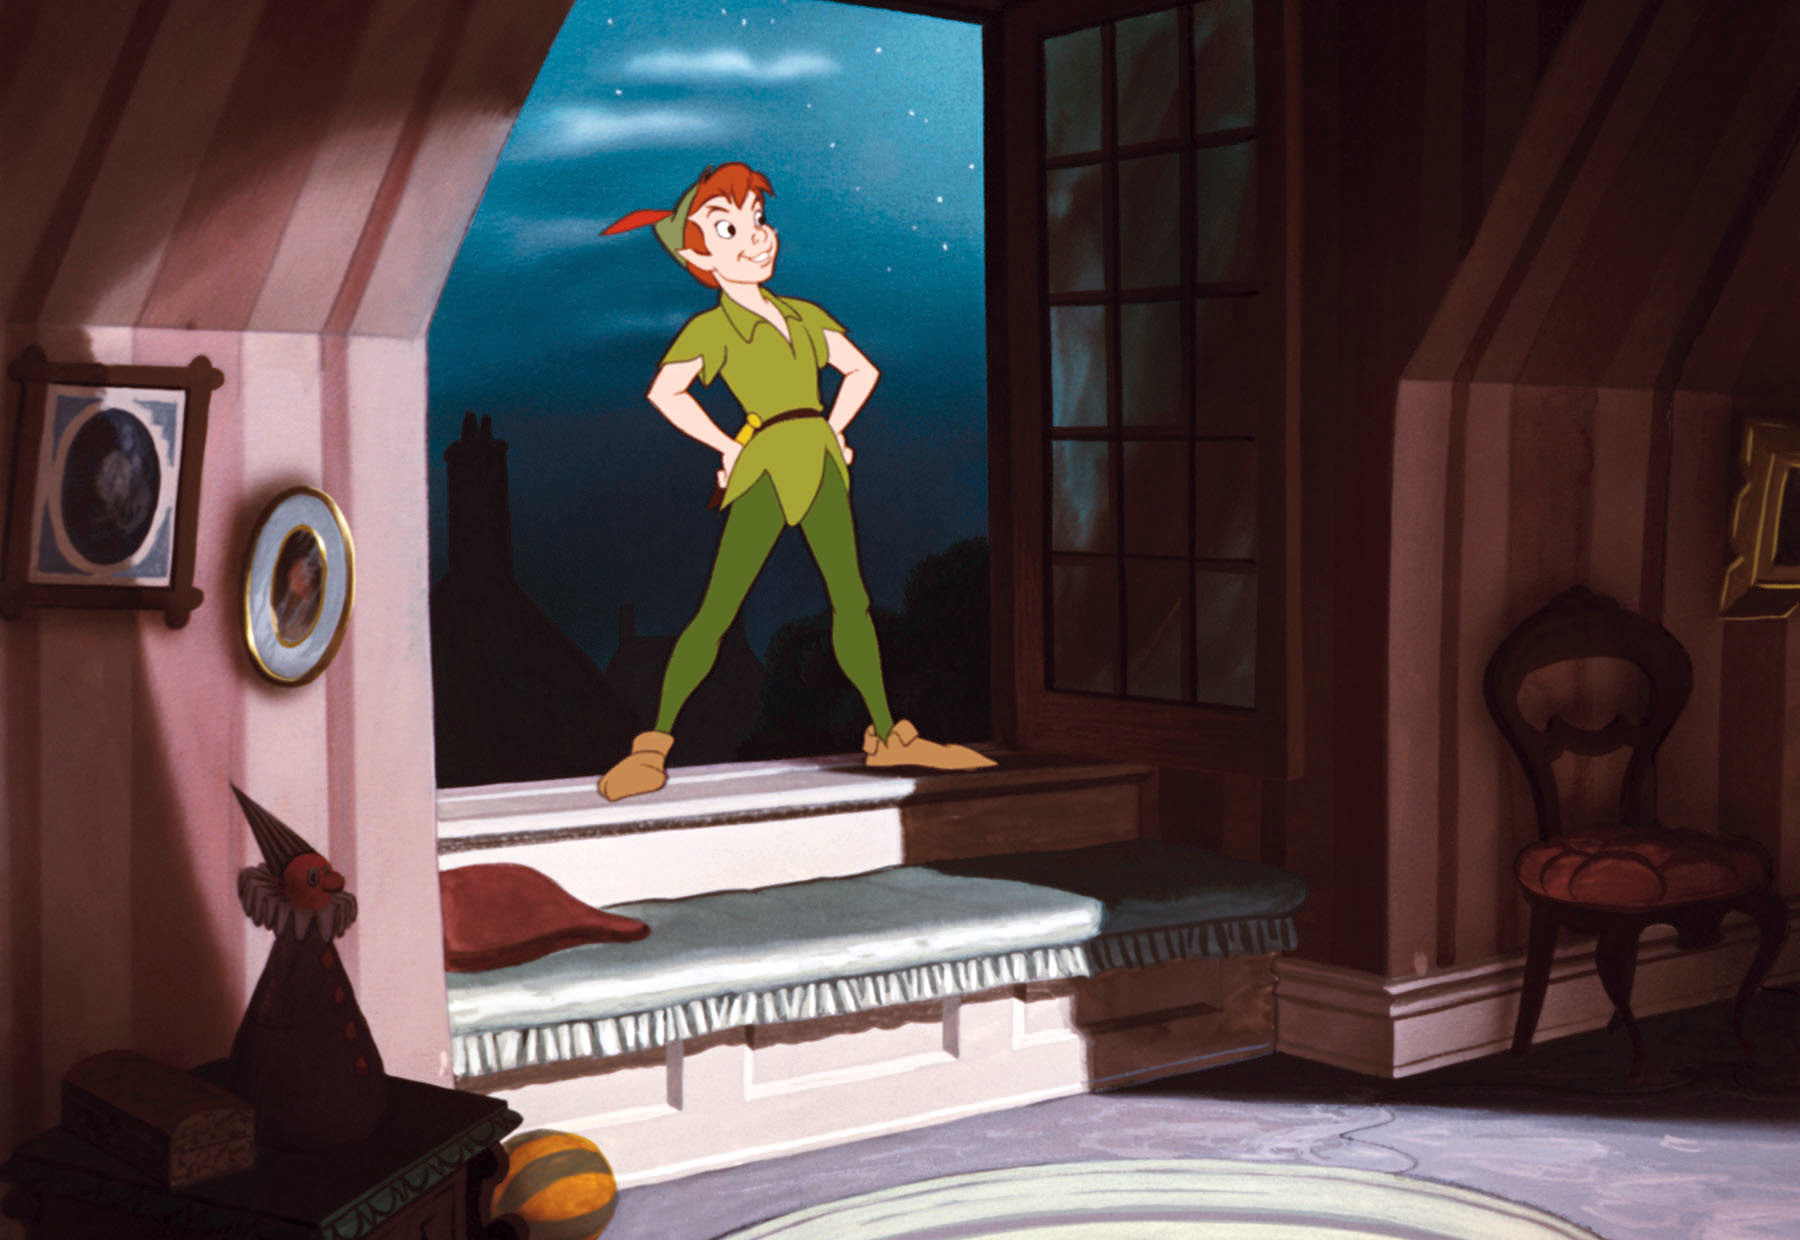 Peter Pan in the animated version